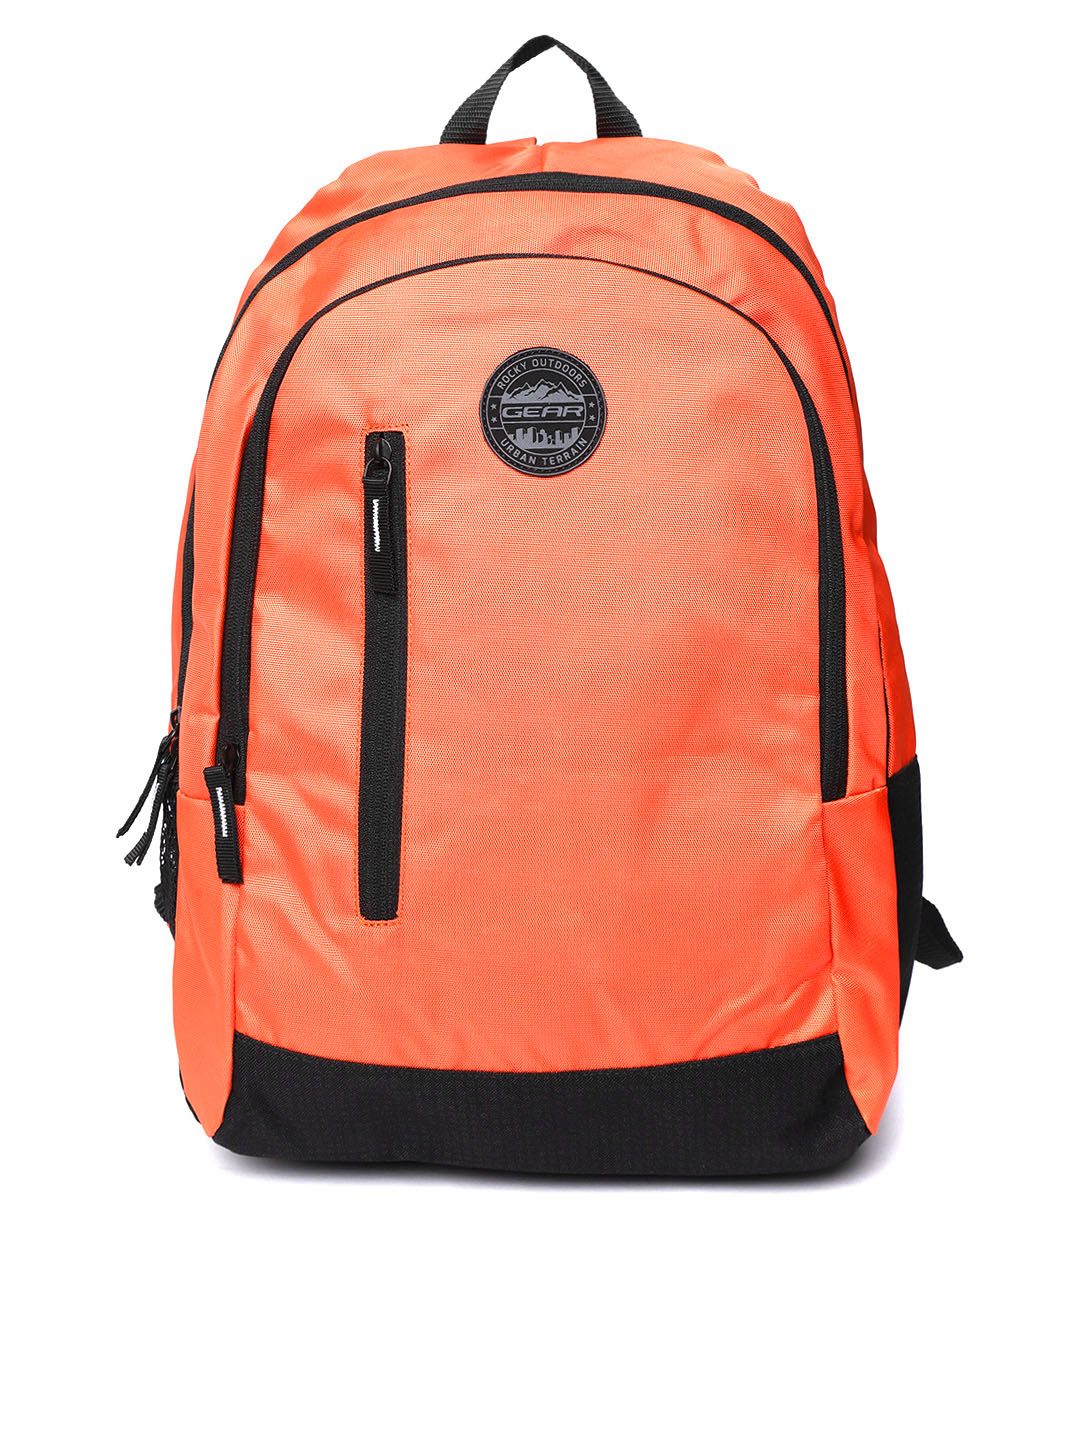 Gear Unisex Orange Solid Backpack Price in India